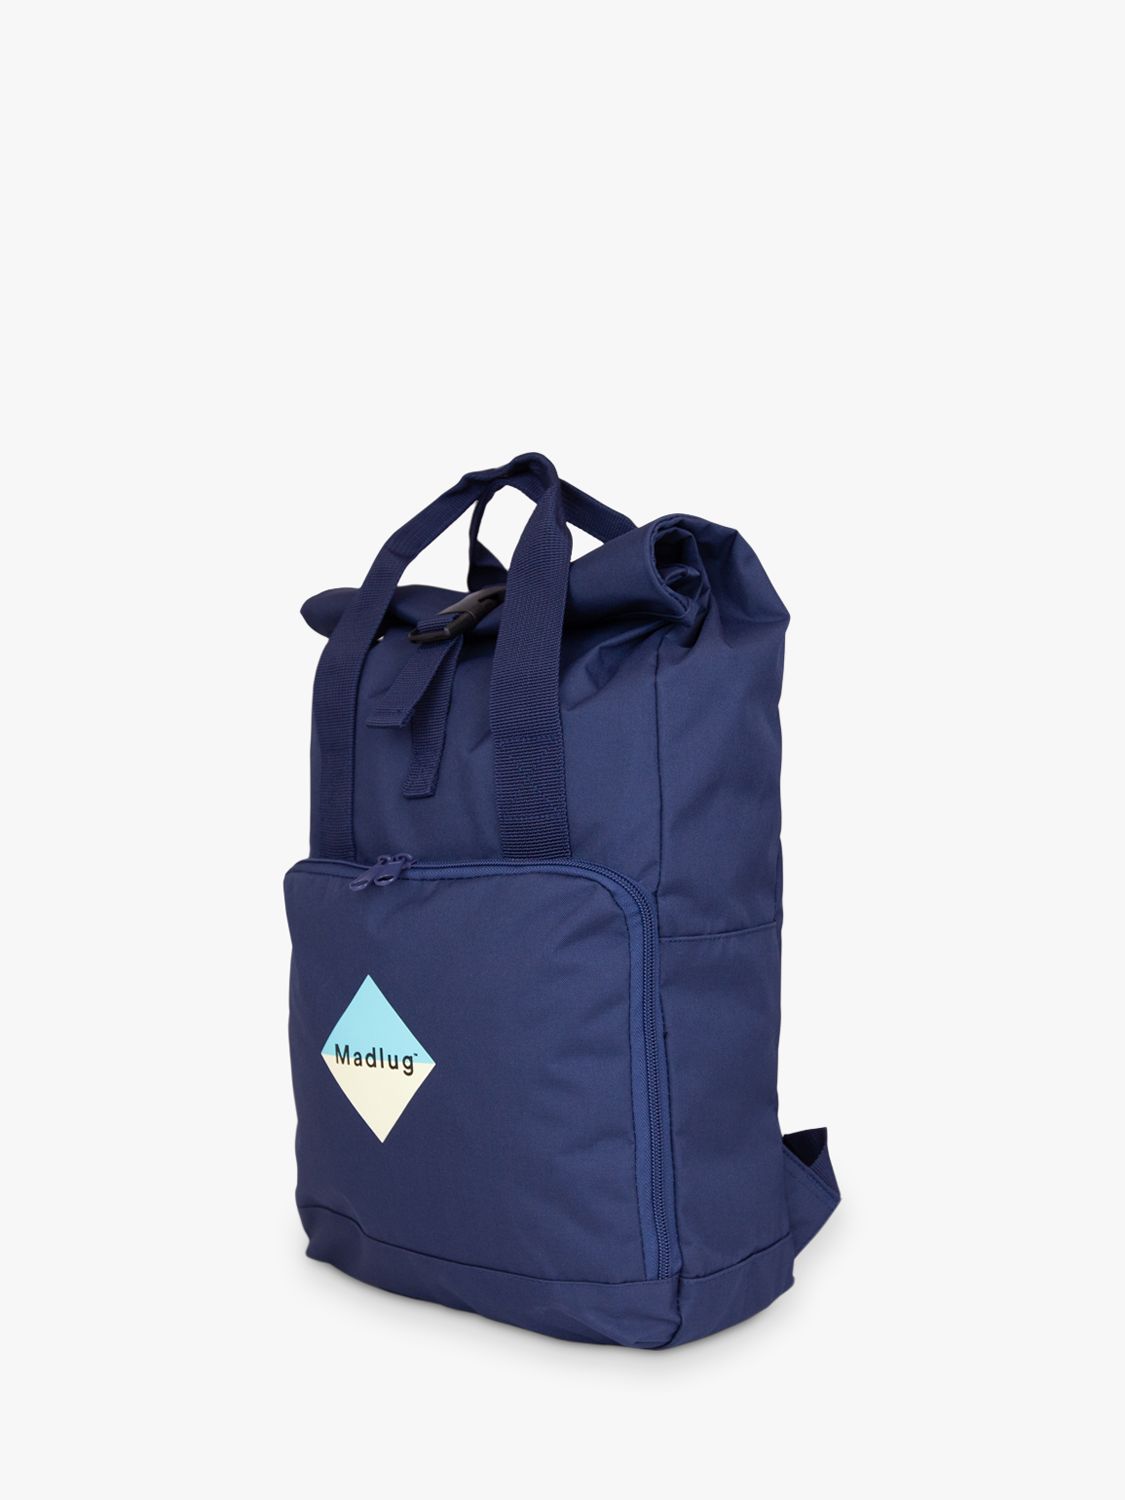 Madlug Roll-Top Backpack, Navy at John Lewis & Partners